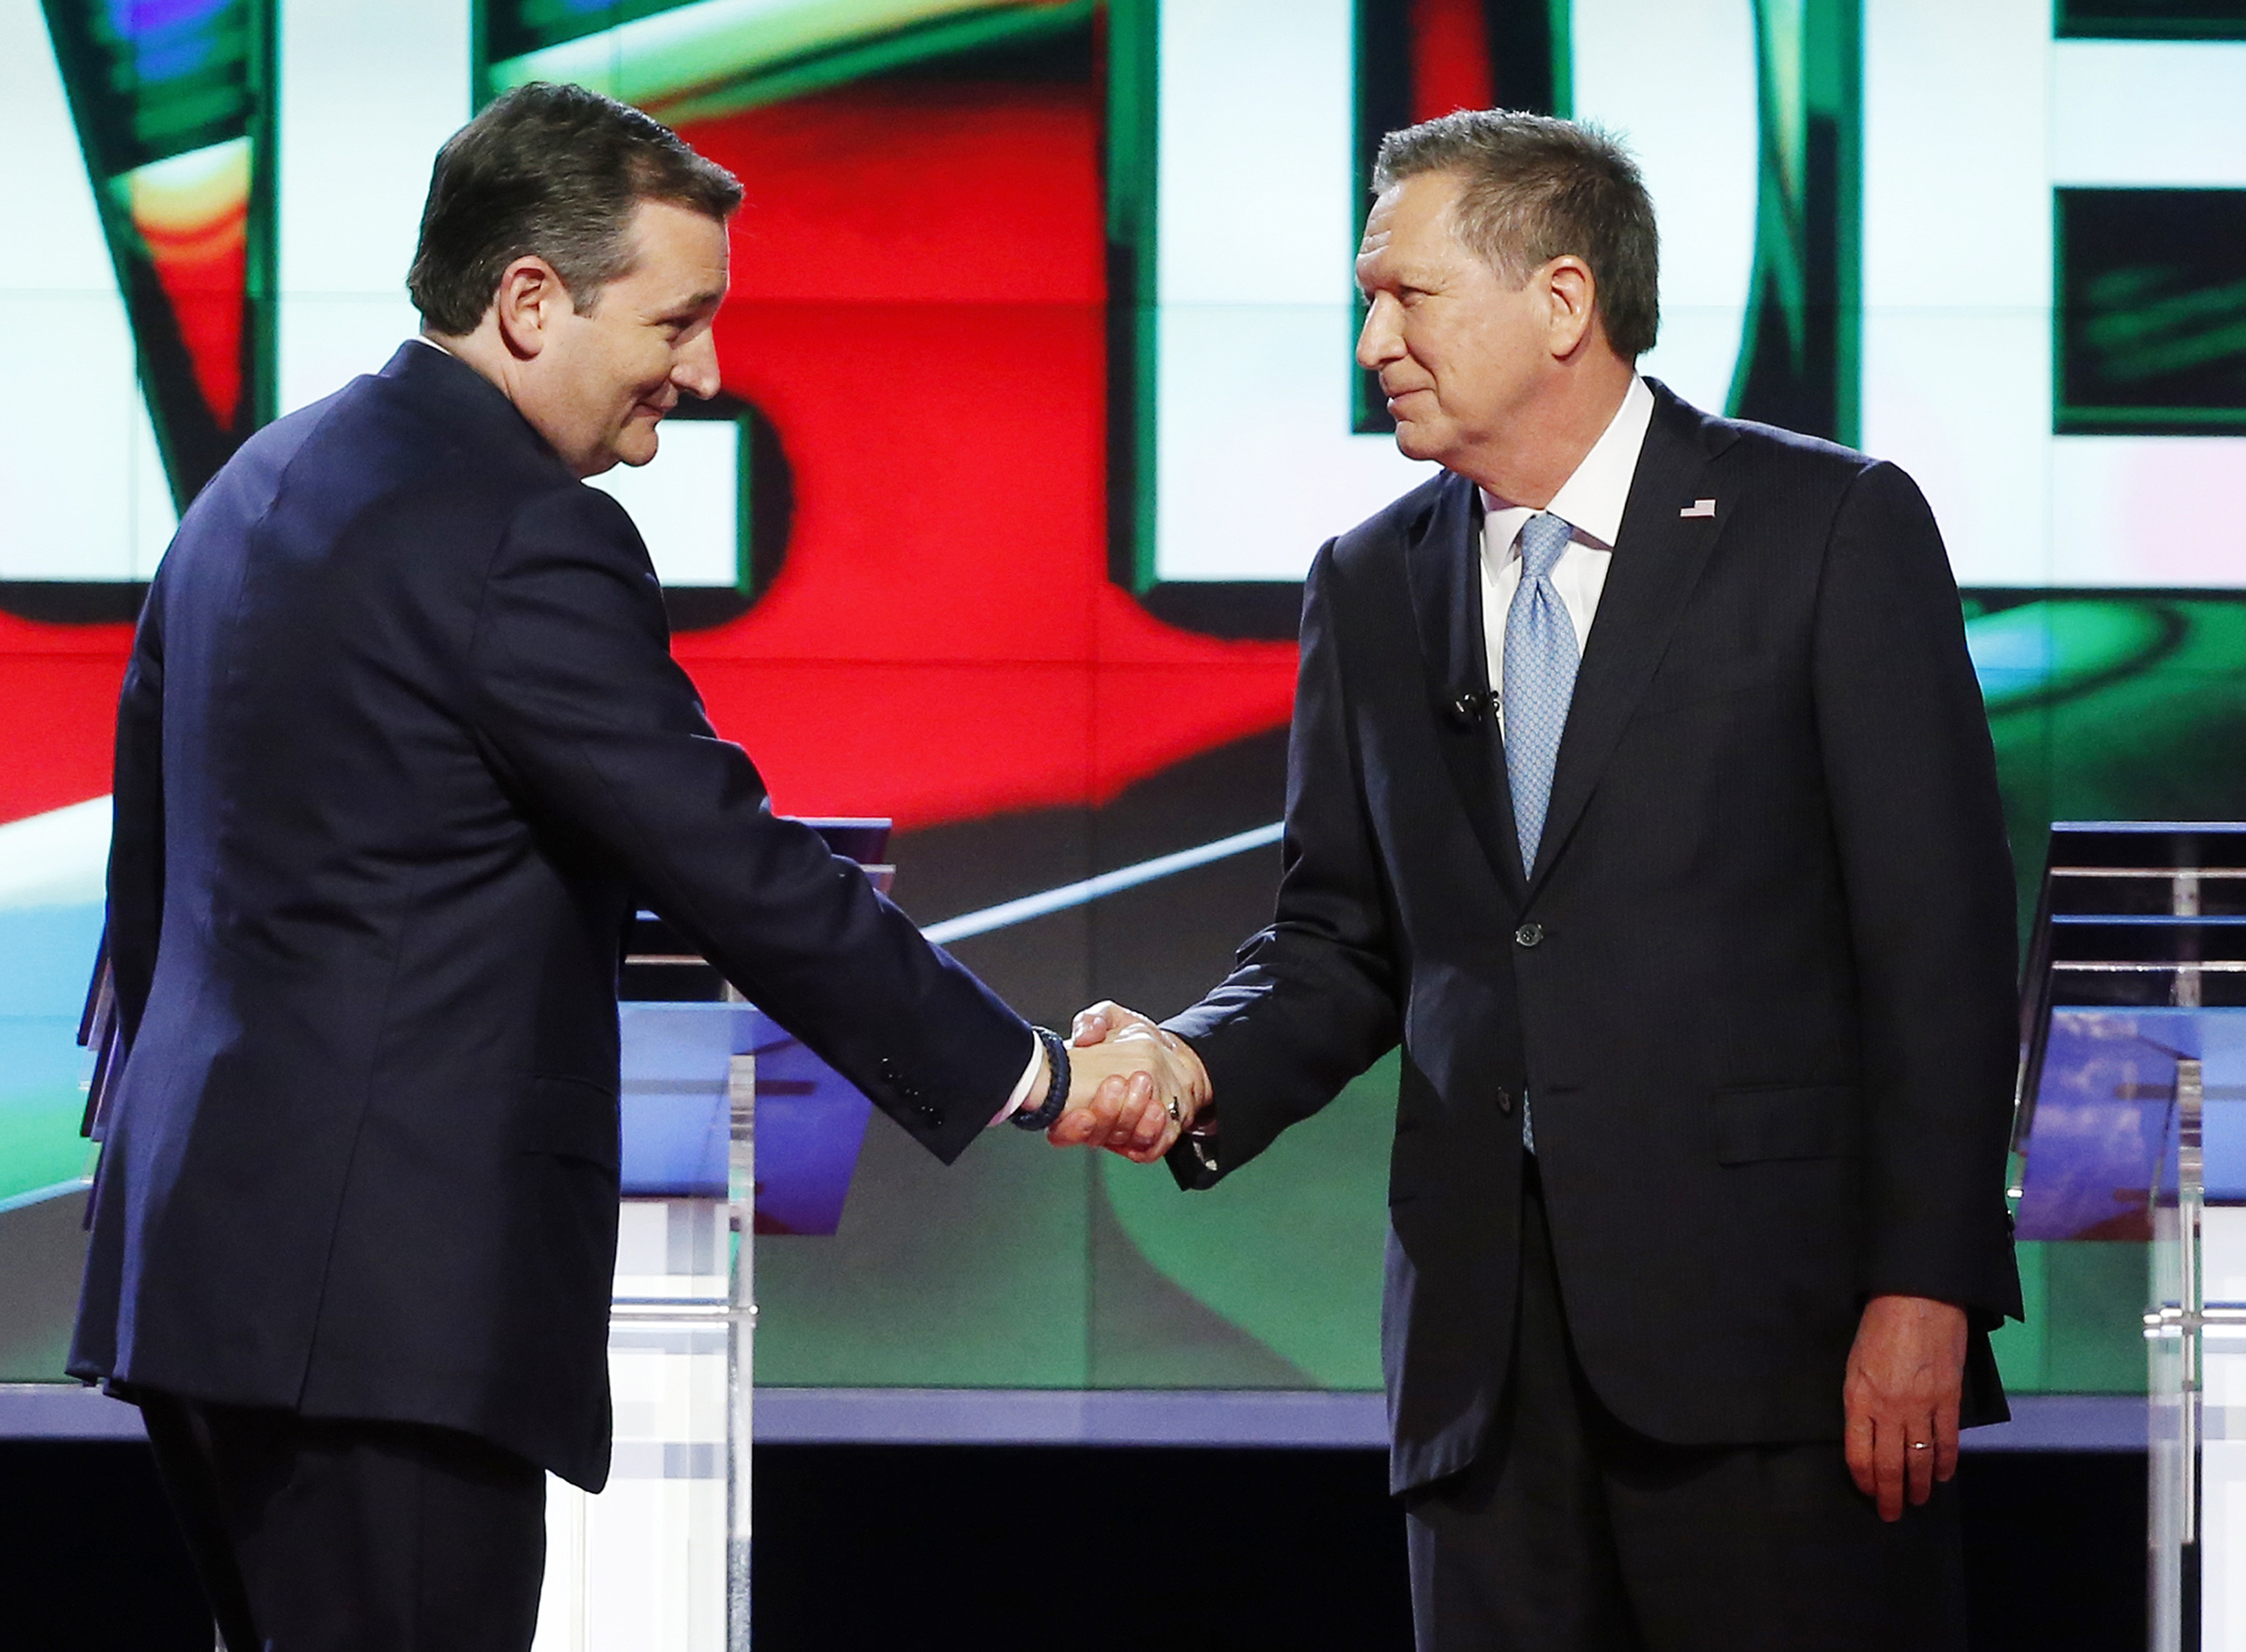 Ted Cruz shakes hands with John Kasich